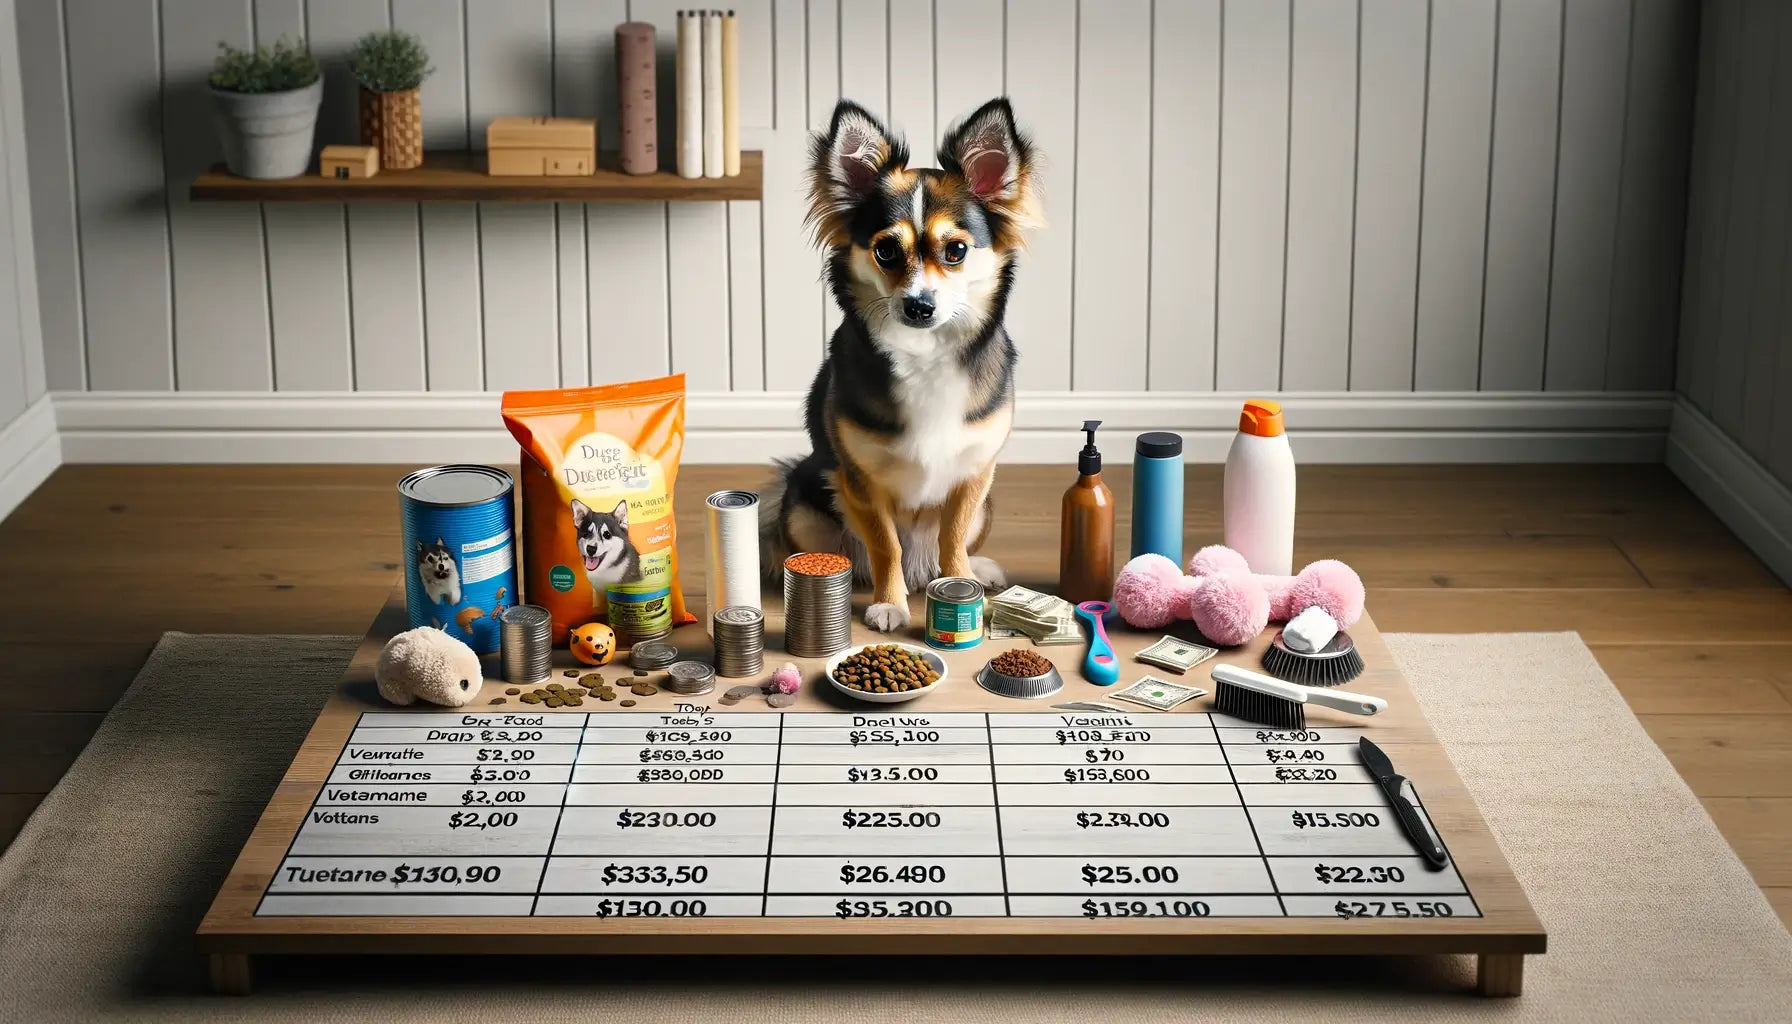 A Chihuahua Husky Mix with the dog sitting beside a table displaying various dog-related items and their costs.